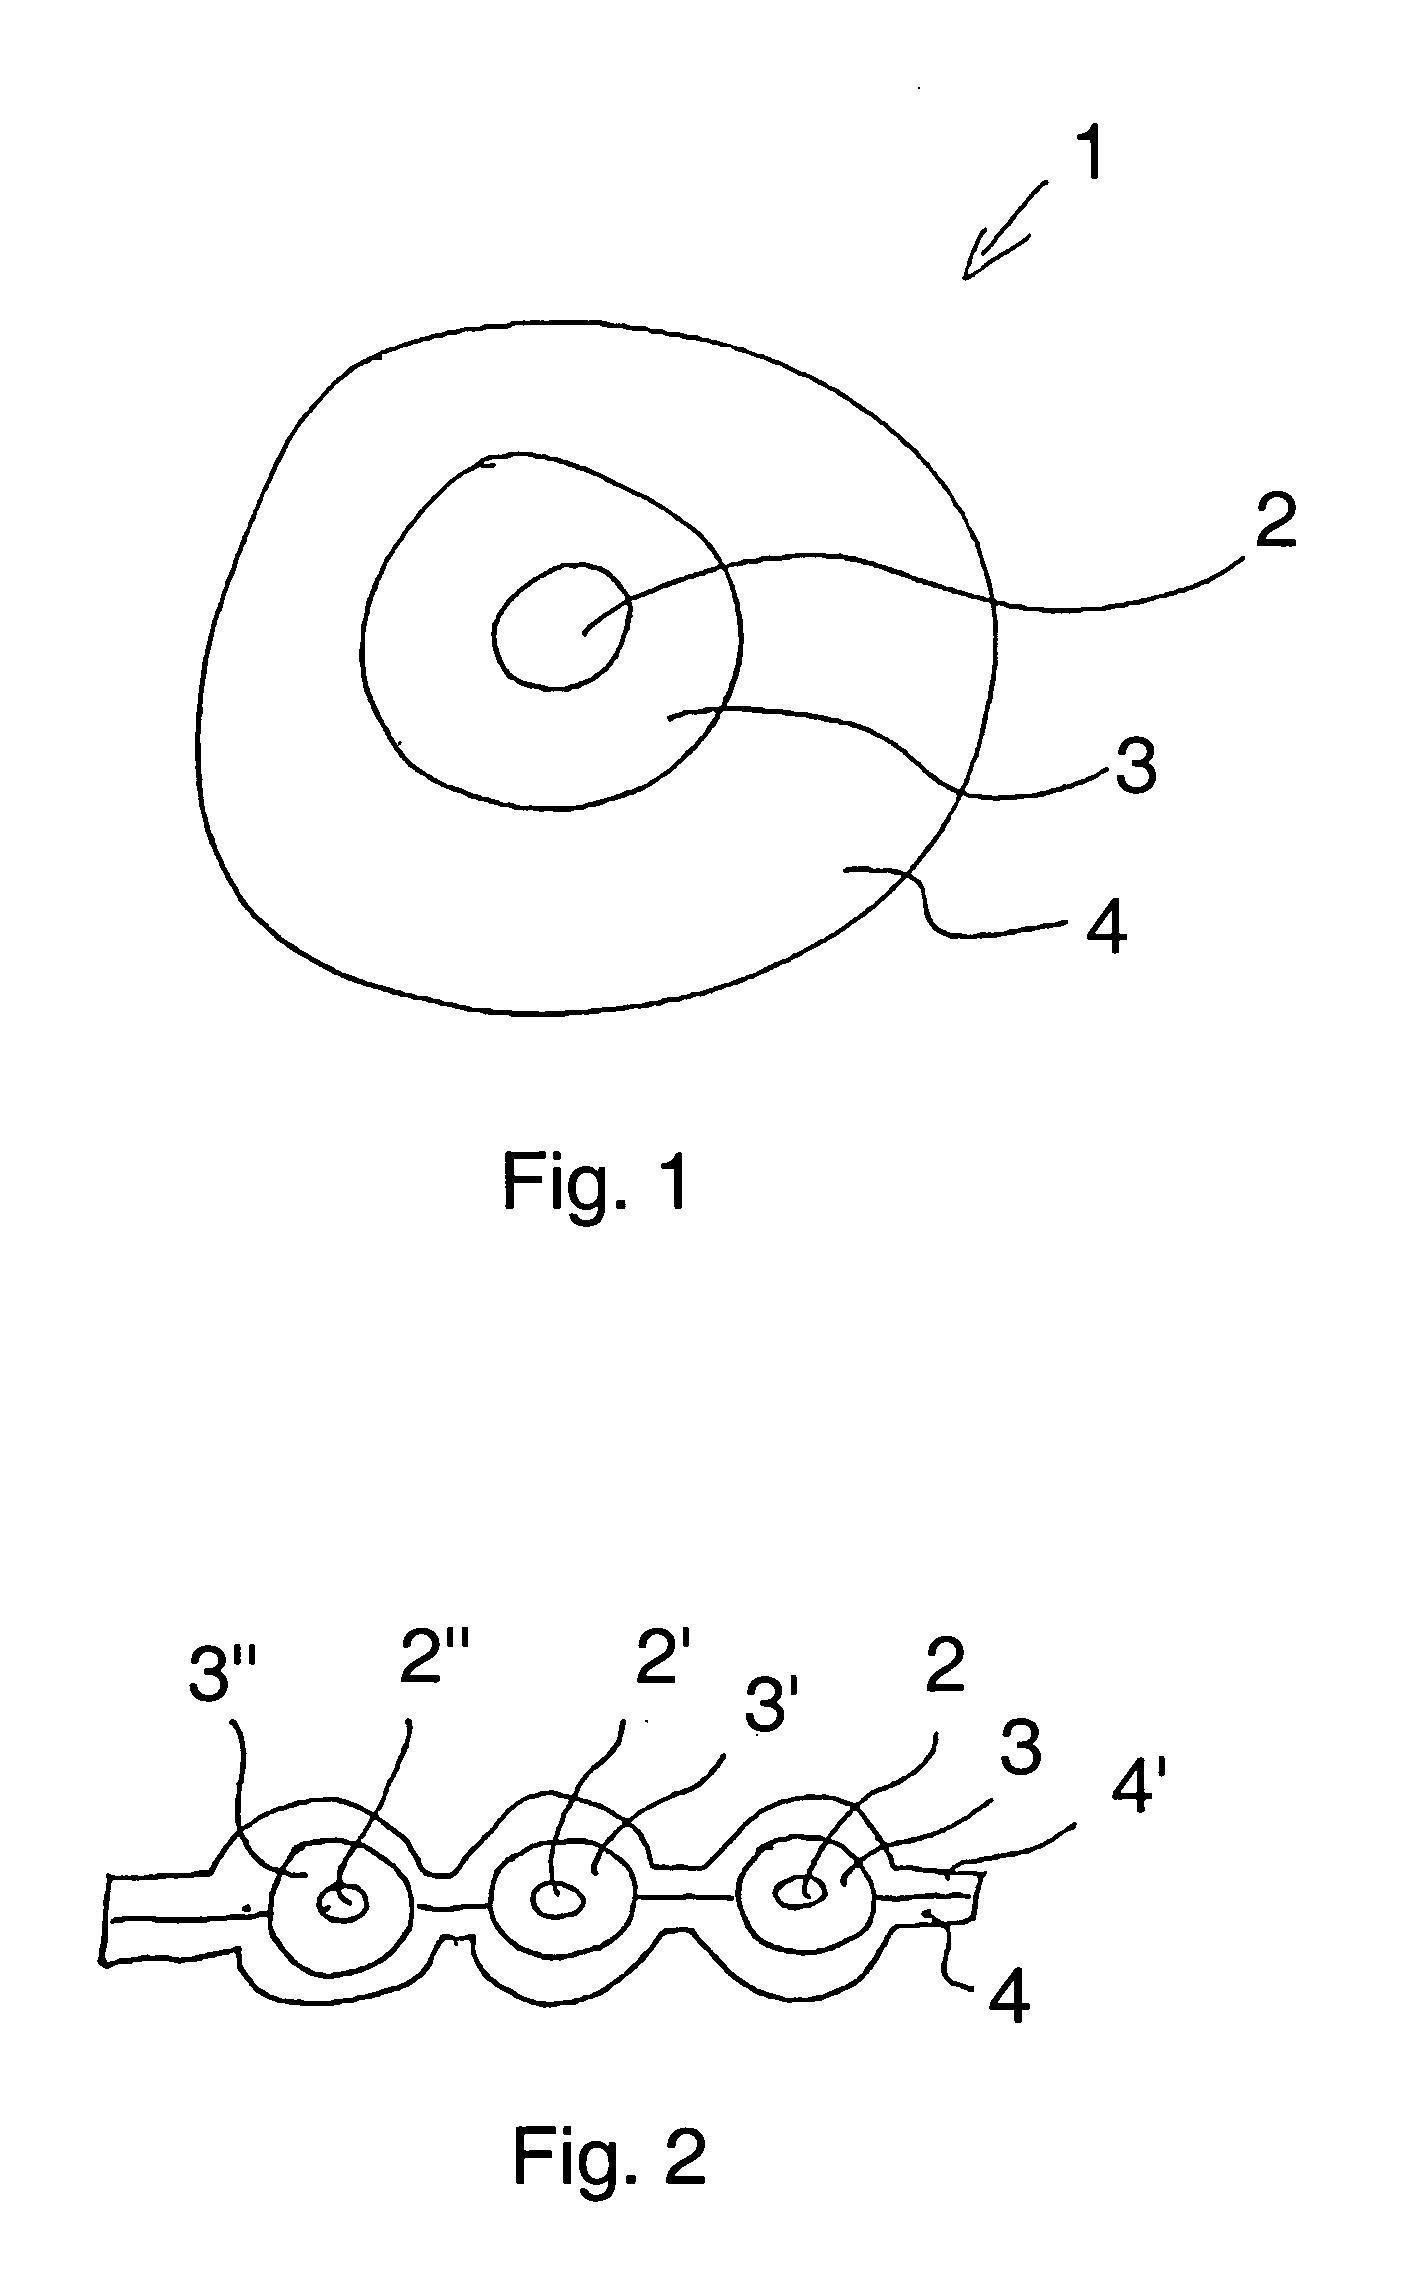 Electric heating device comprising a coated heat conductor